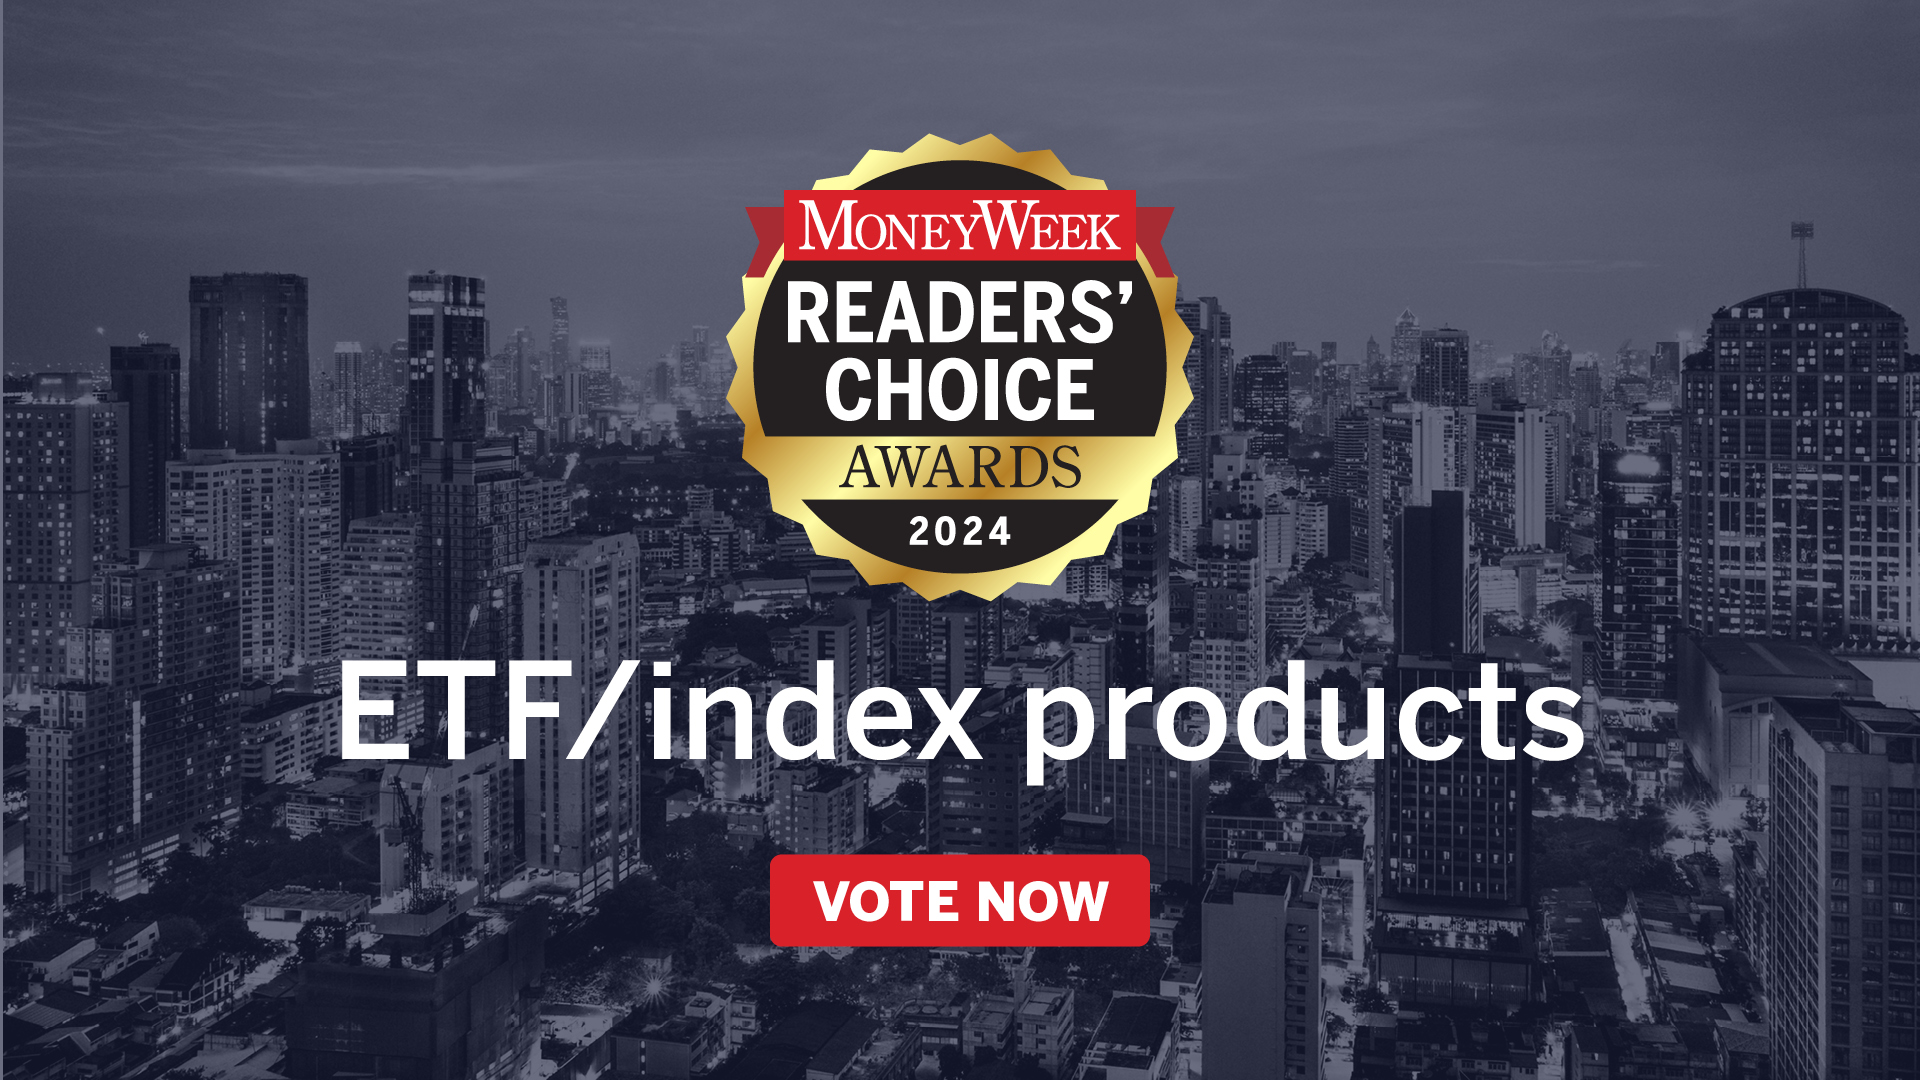 MW Readers' Choice Awards 2024 ETF/index products